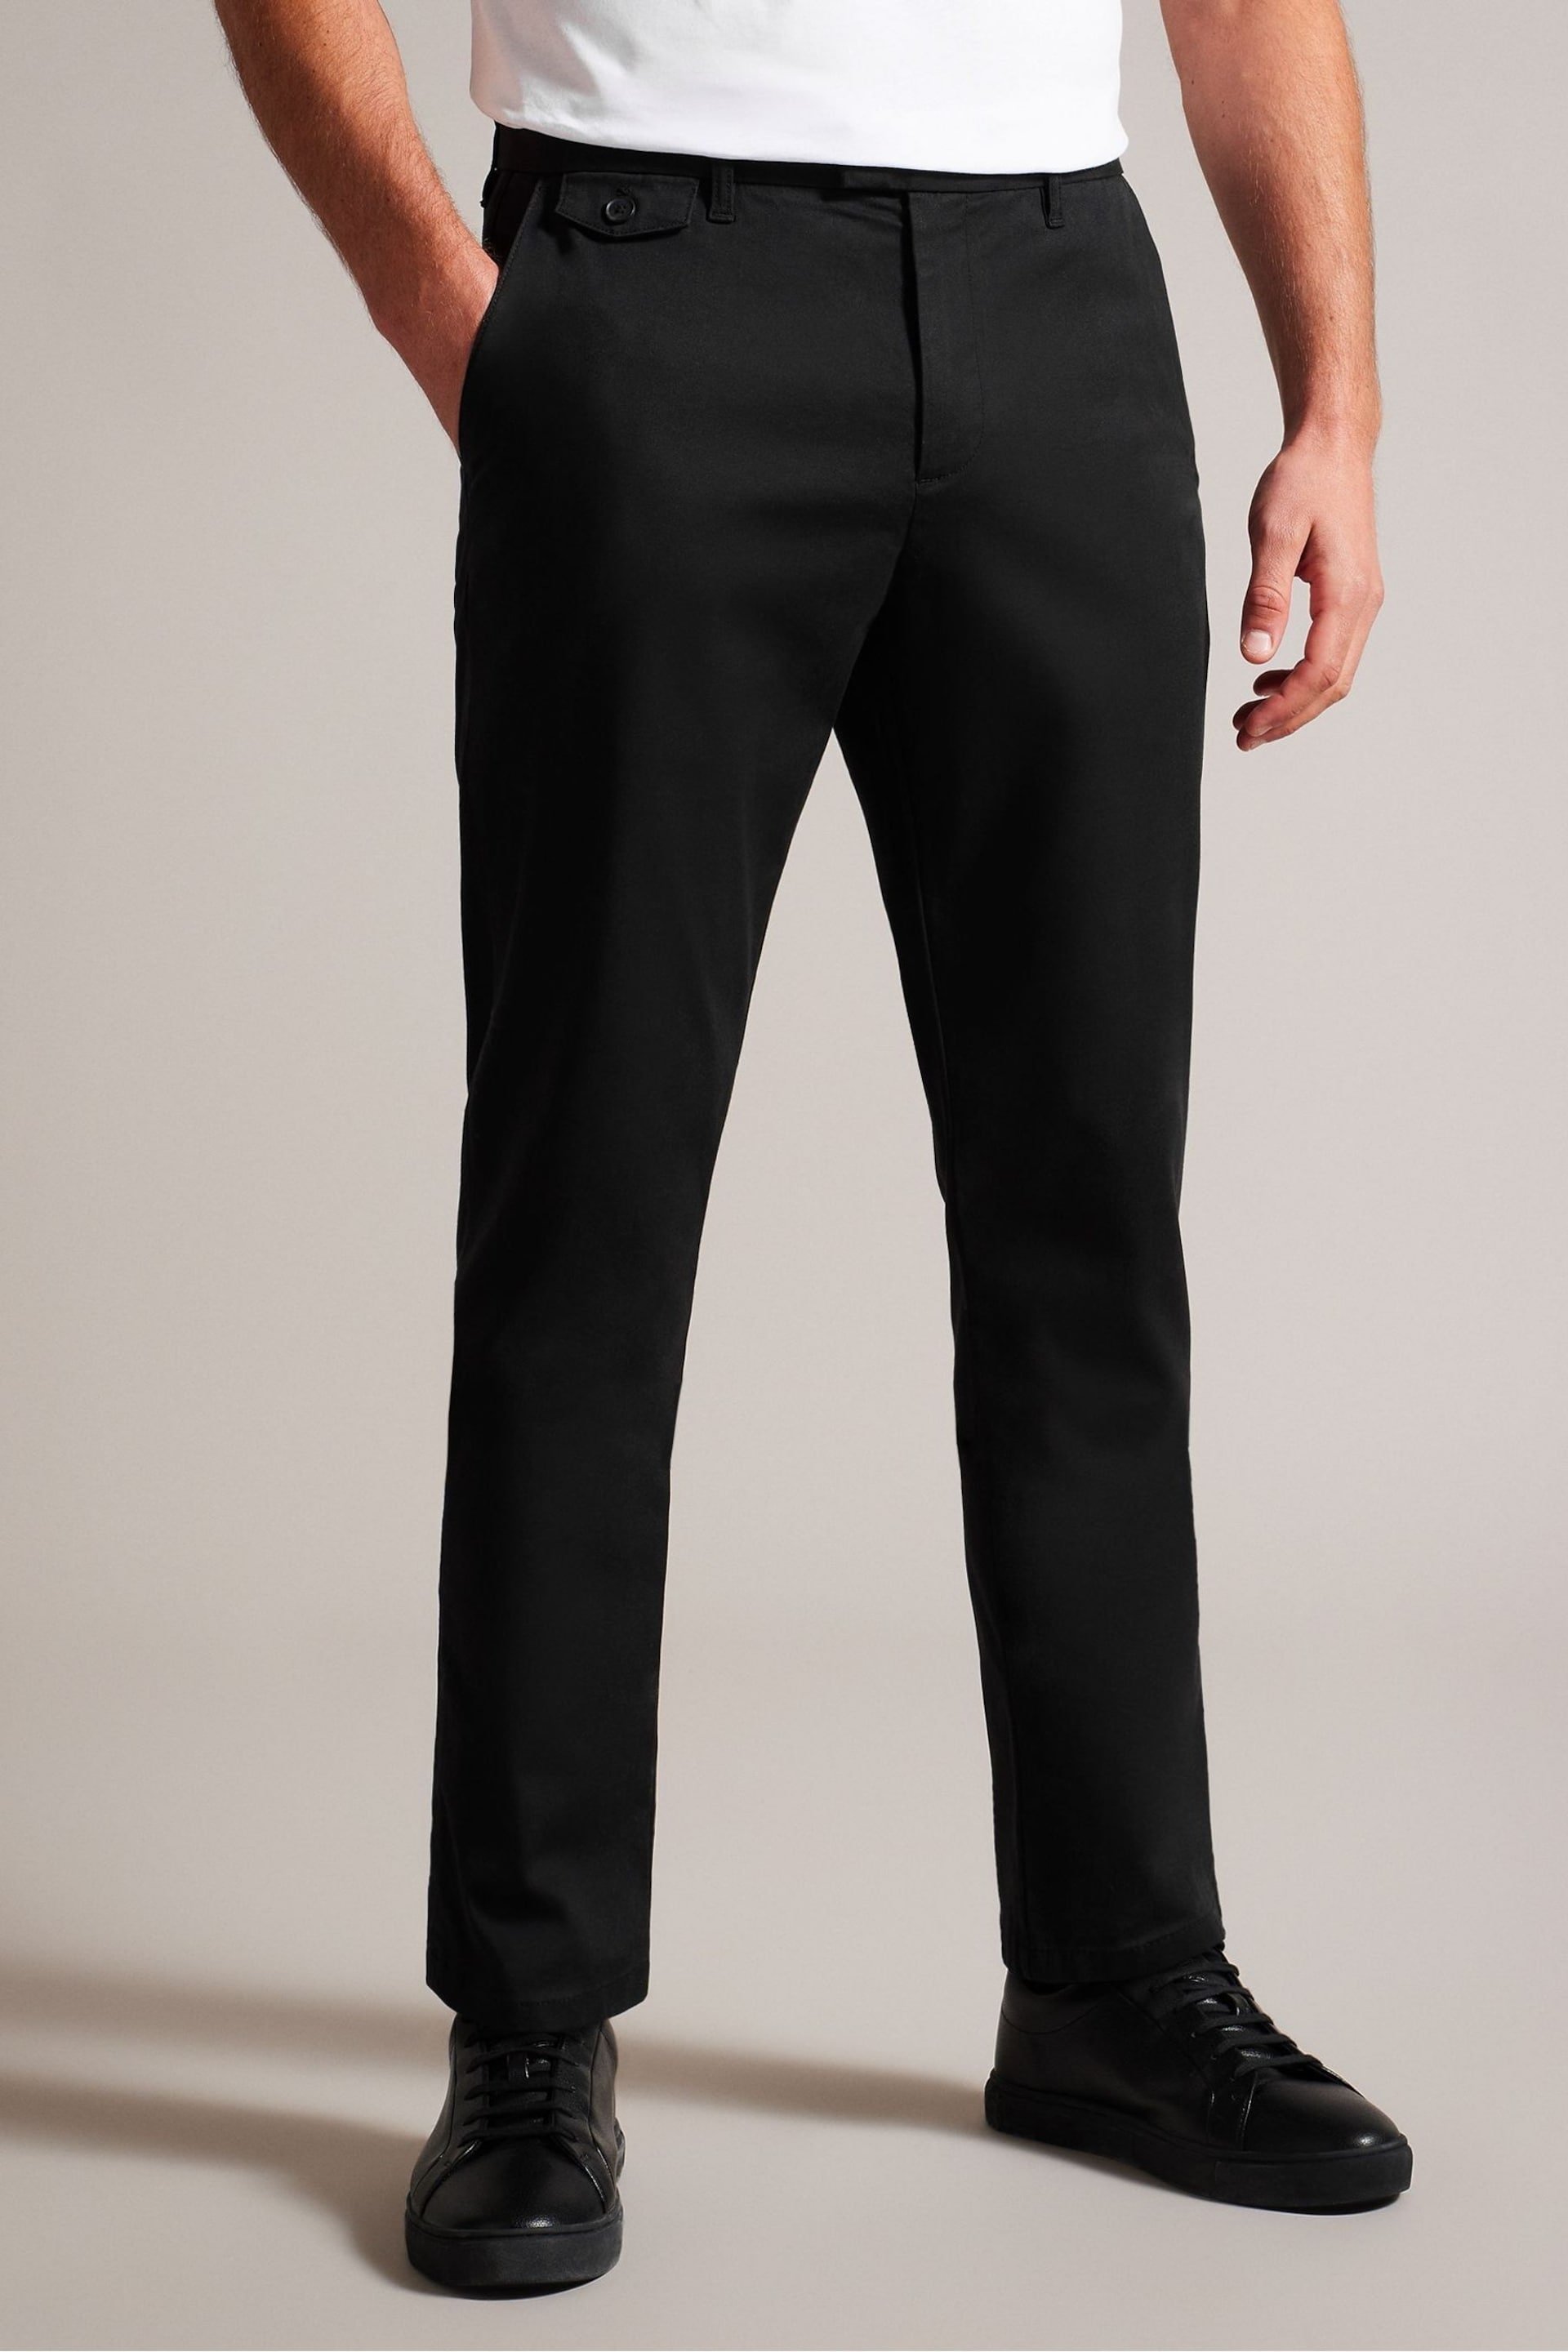 Ted Baker Black Slim Fit Haydae Textured Chino Trousers - Image 2 of 5